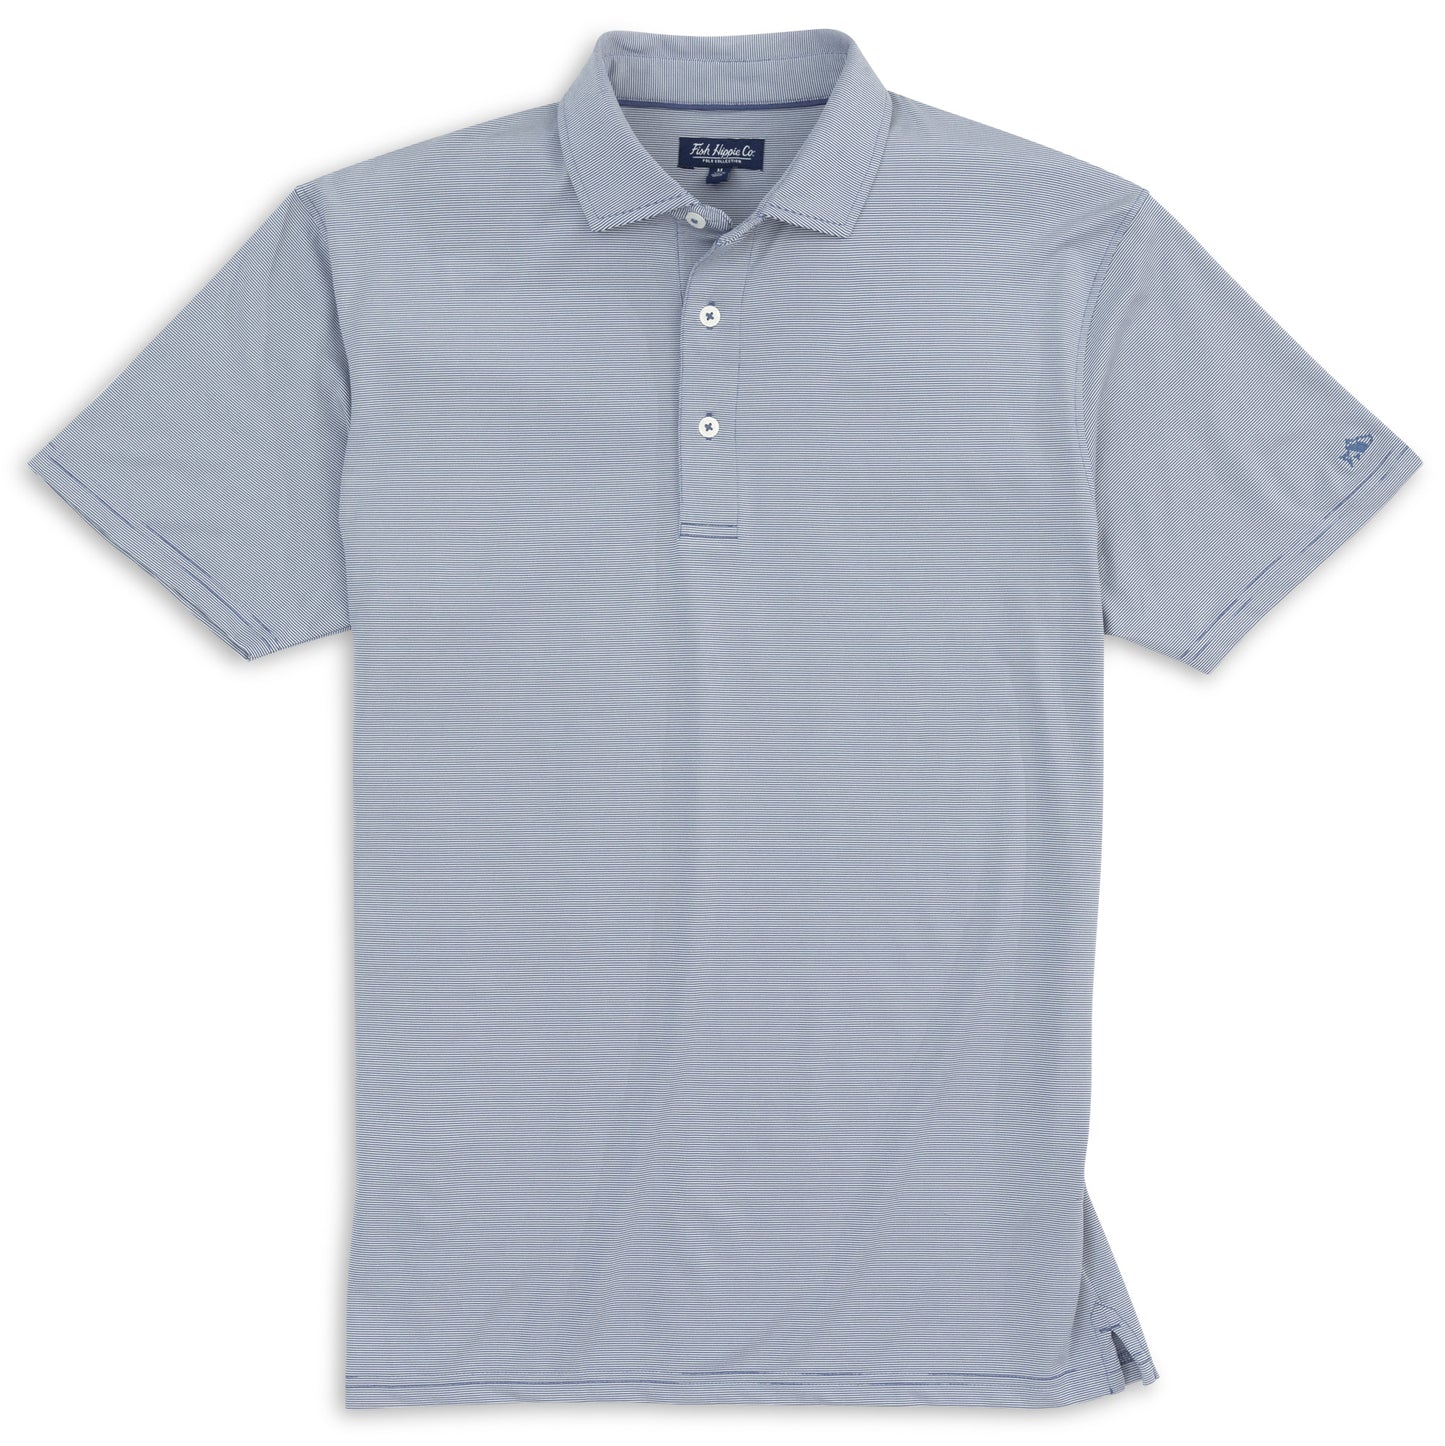 Runnel Performance Polo